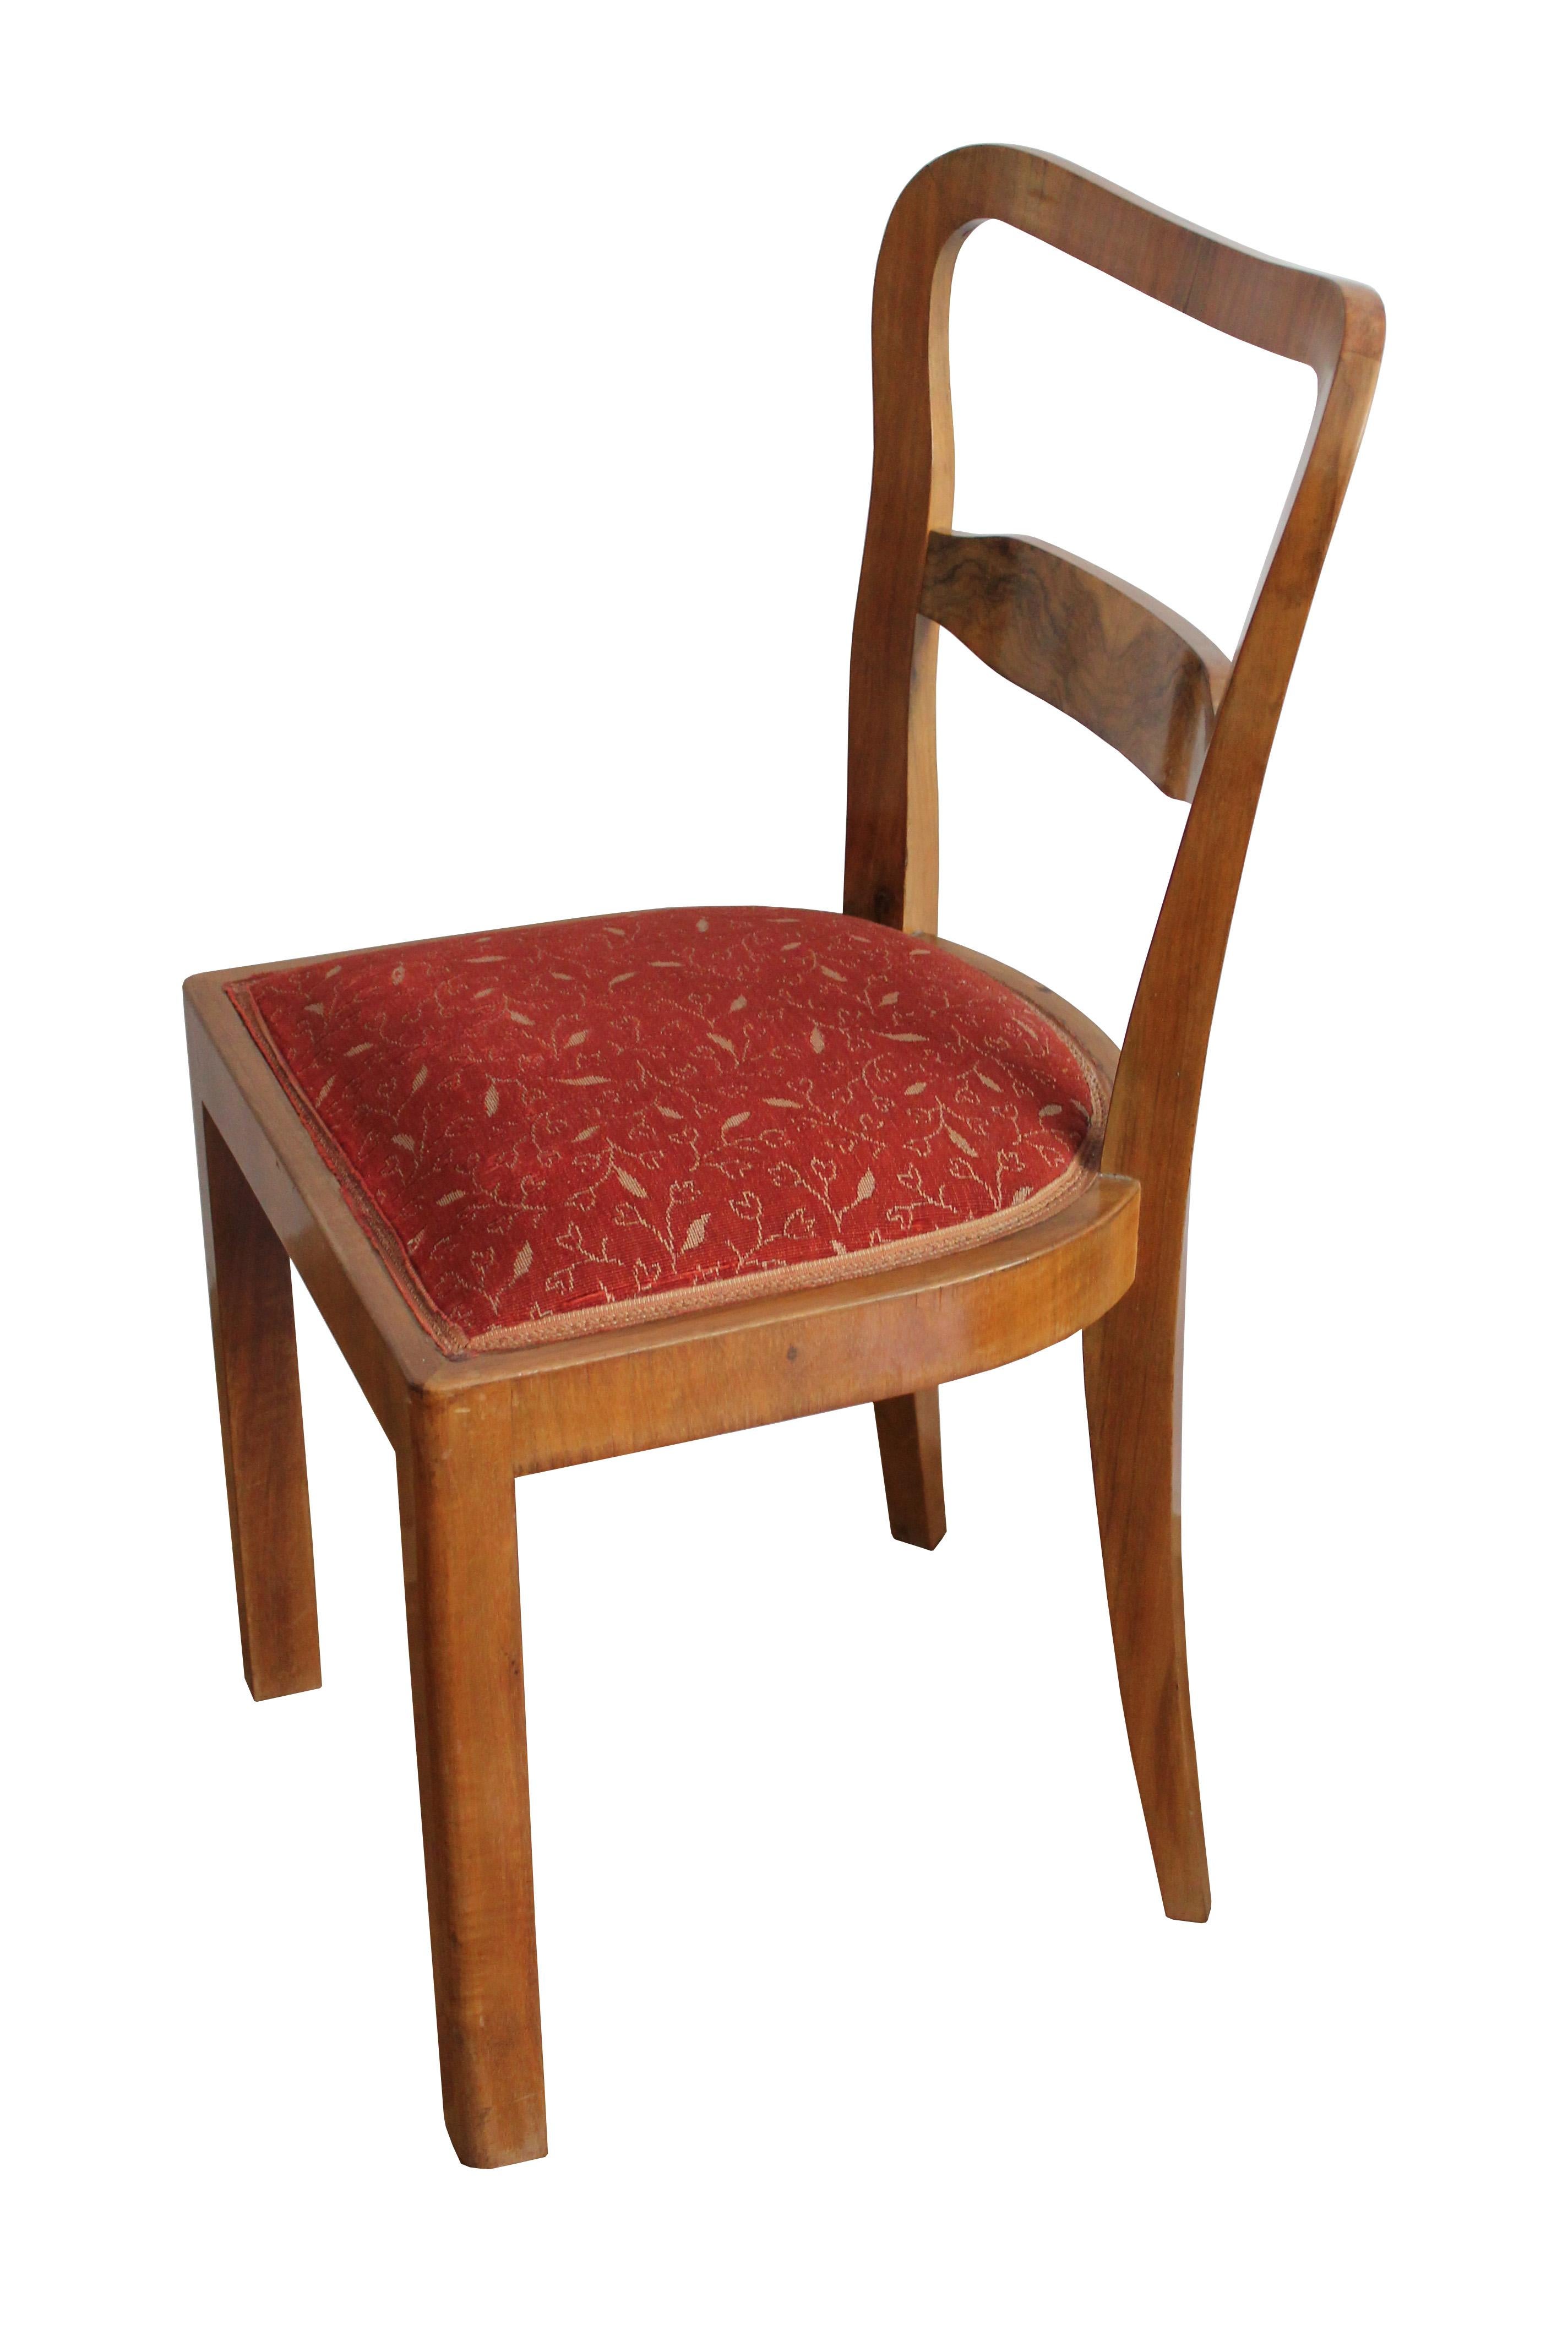 An unique set of four Art Deco dining chairs. They were made at the request for a private project of an employee of UP Brno in Czechoslovakia in the 1940s.                                    

The chairs are made of a combination of wood and